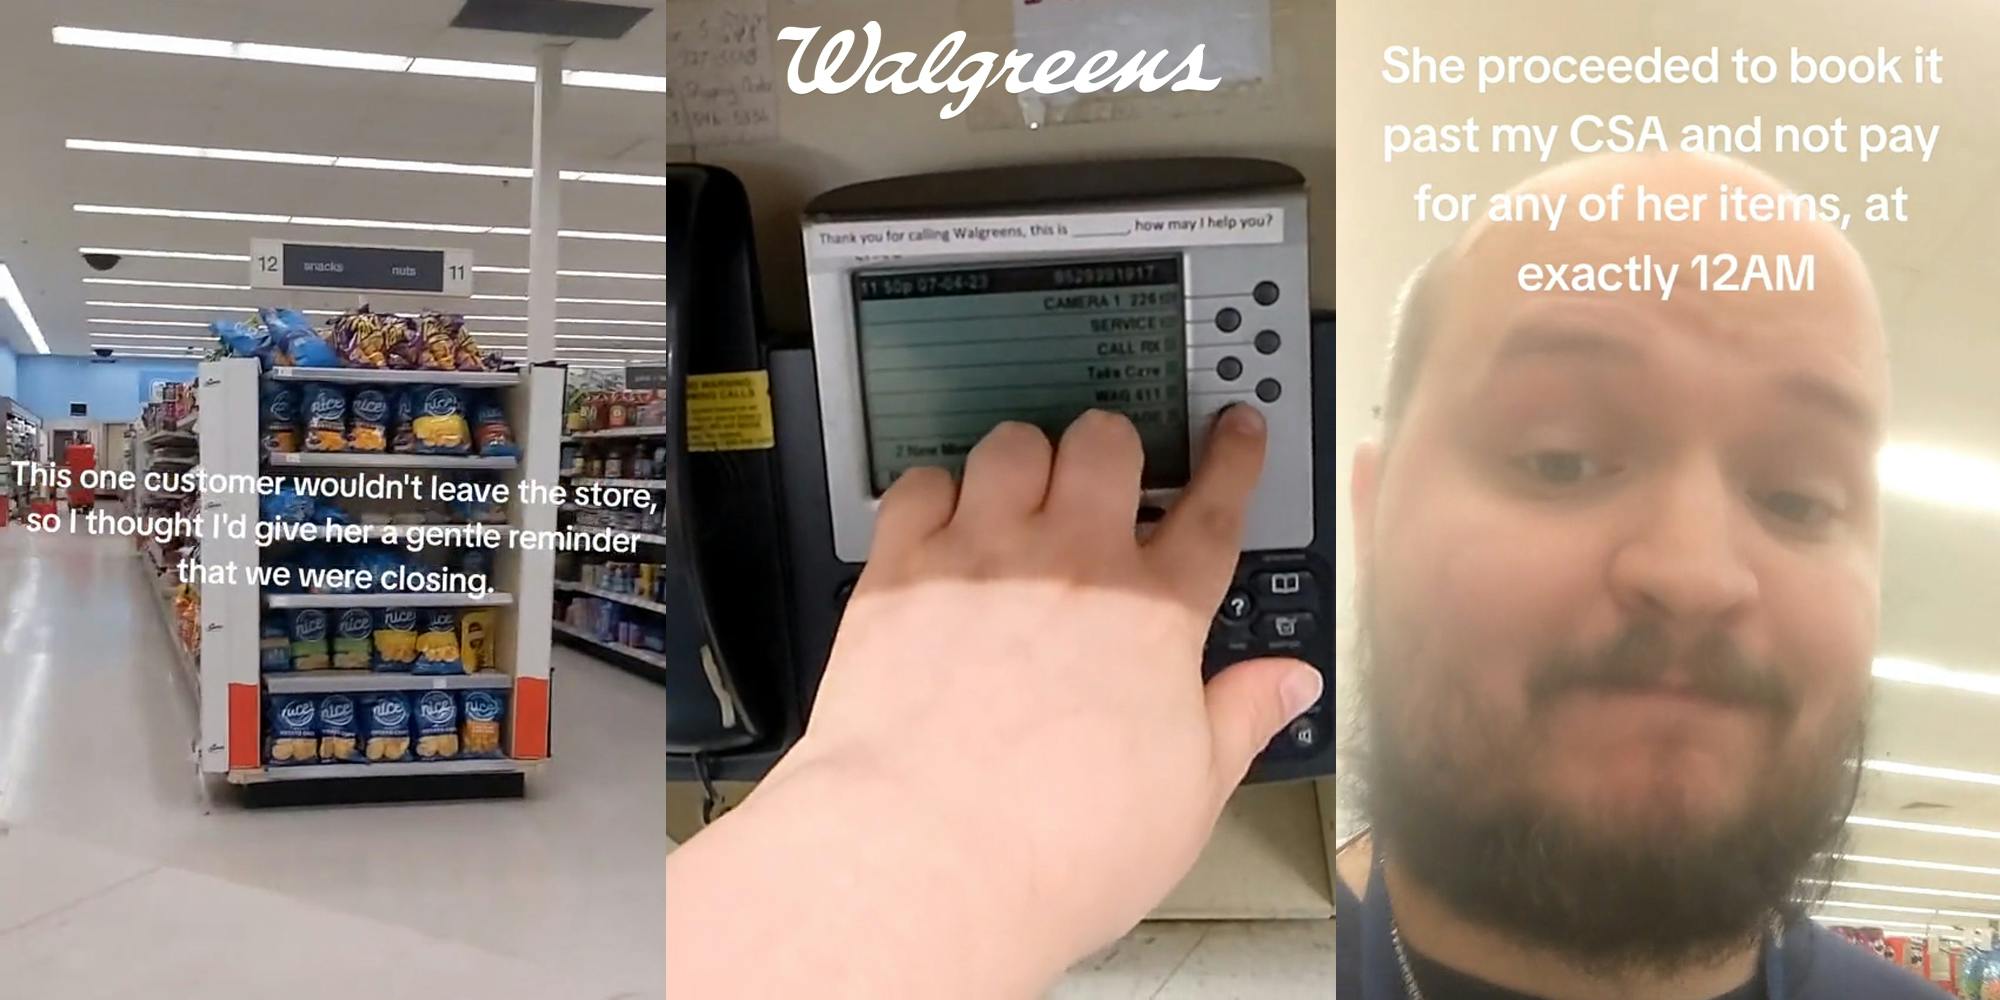 Walgreens interior with caption "This one customer wouldn't leave the store, so I thought I'd give her a gentle reminder that we were closing" (l) Walgreens worker pressing button on phone with Walgreens logo above (c) Walgreens worker speaking with caption "She proceeded to book it past my CSA and not pay for any of her items at exactly 12AM" (r)